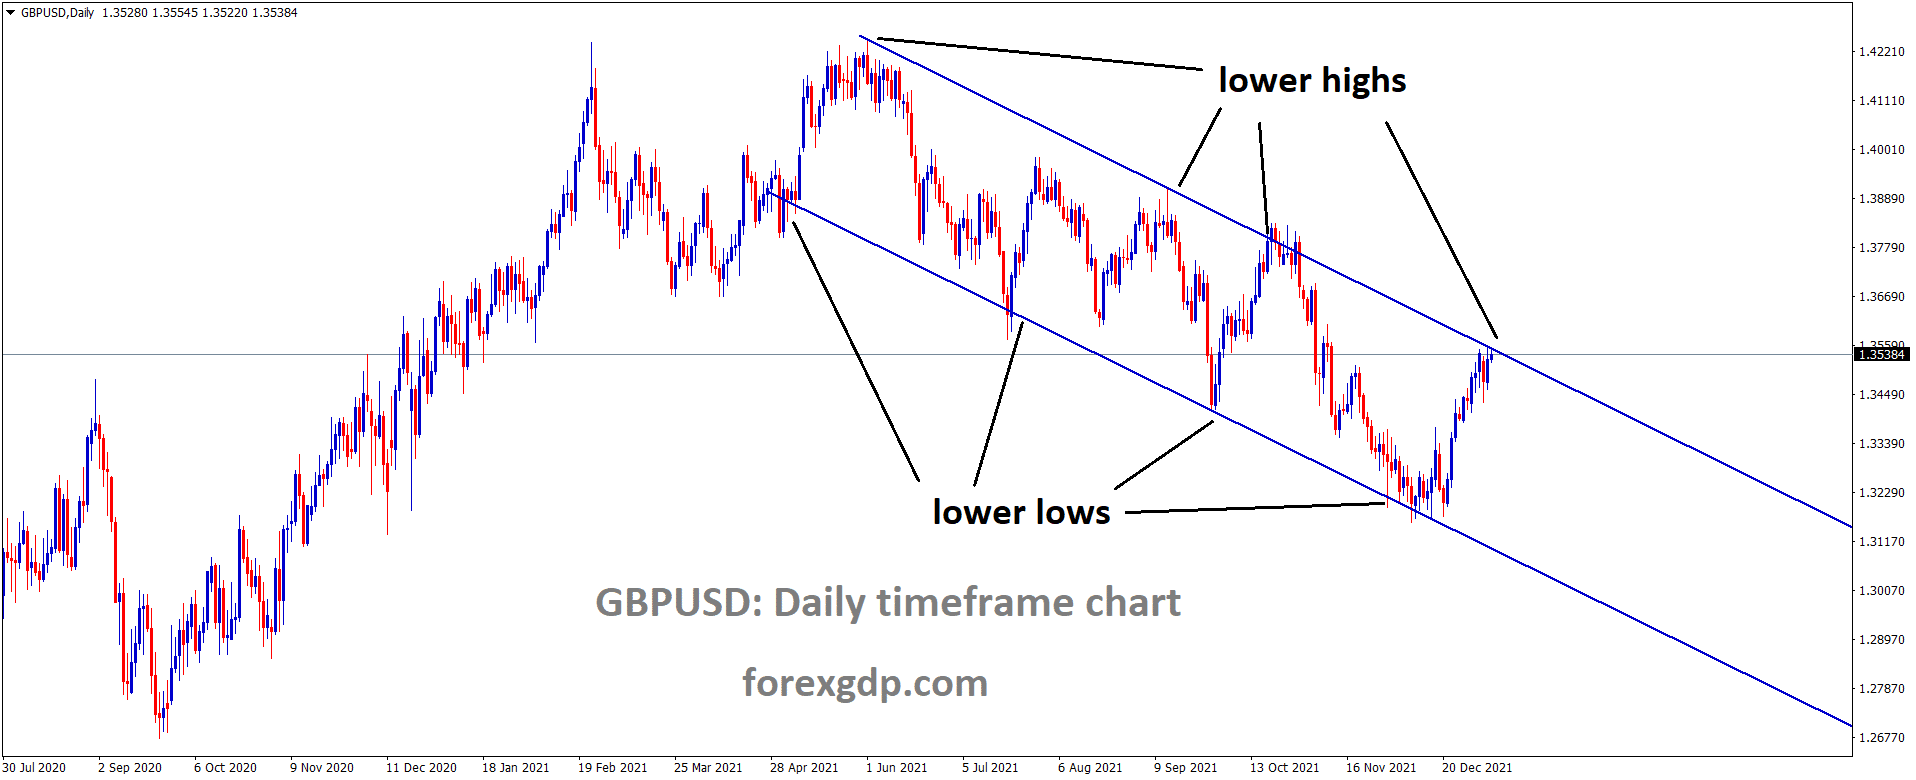 GBPUSD is moving in the Descending channel and the market has reached the lower high area of the channel 1